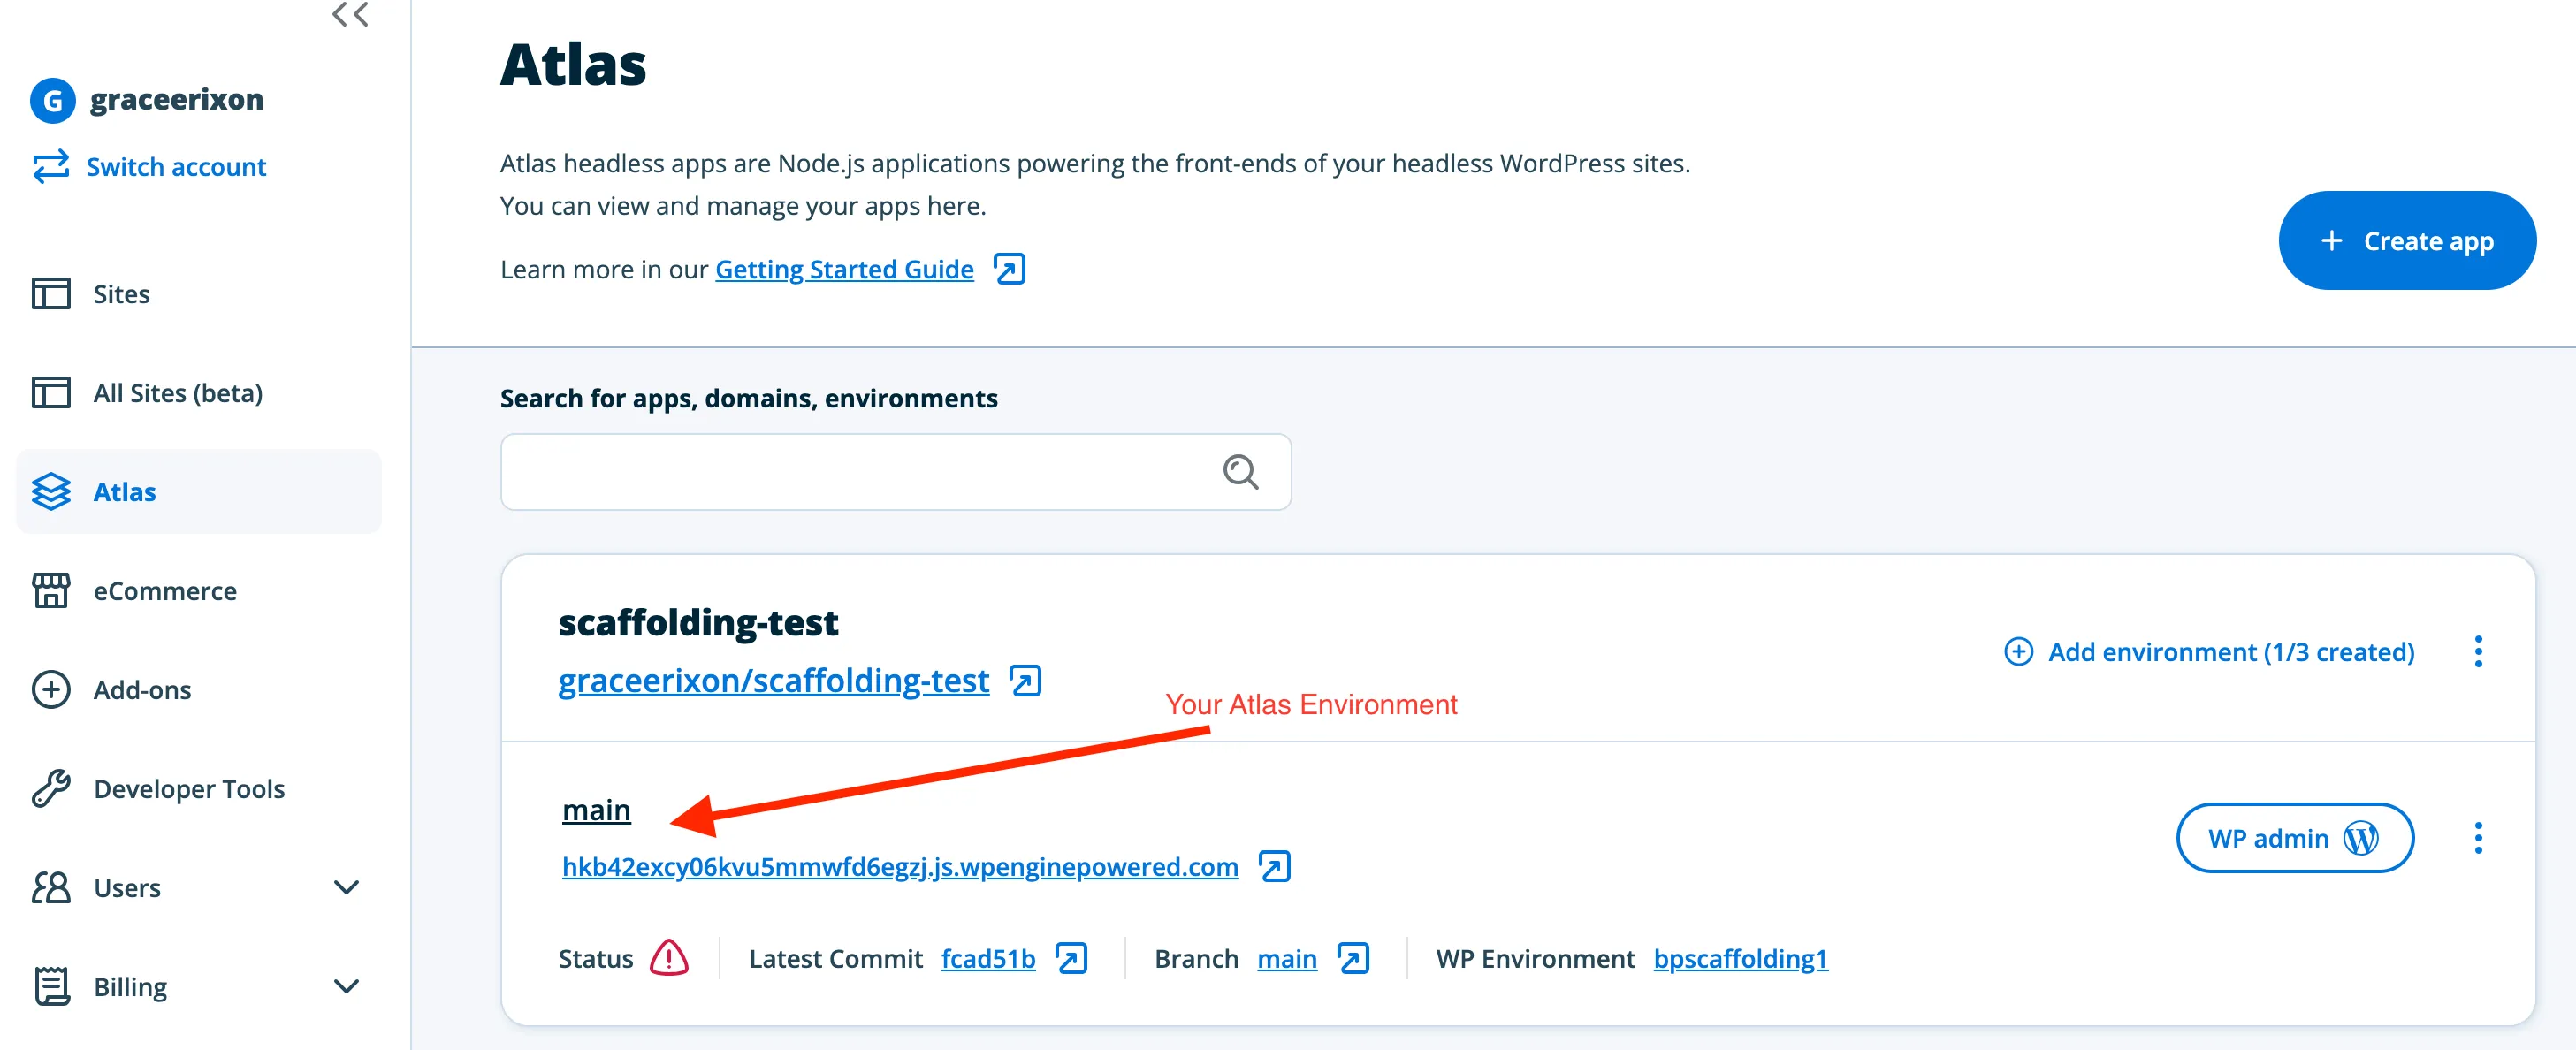 Select an Atlas app's environment link to visit it's Environment Details page